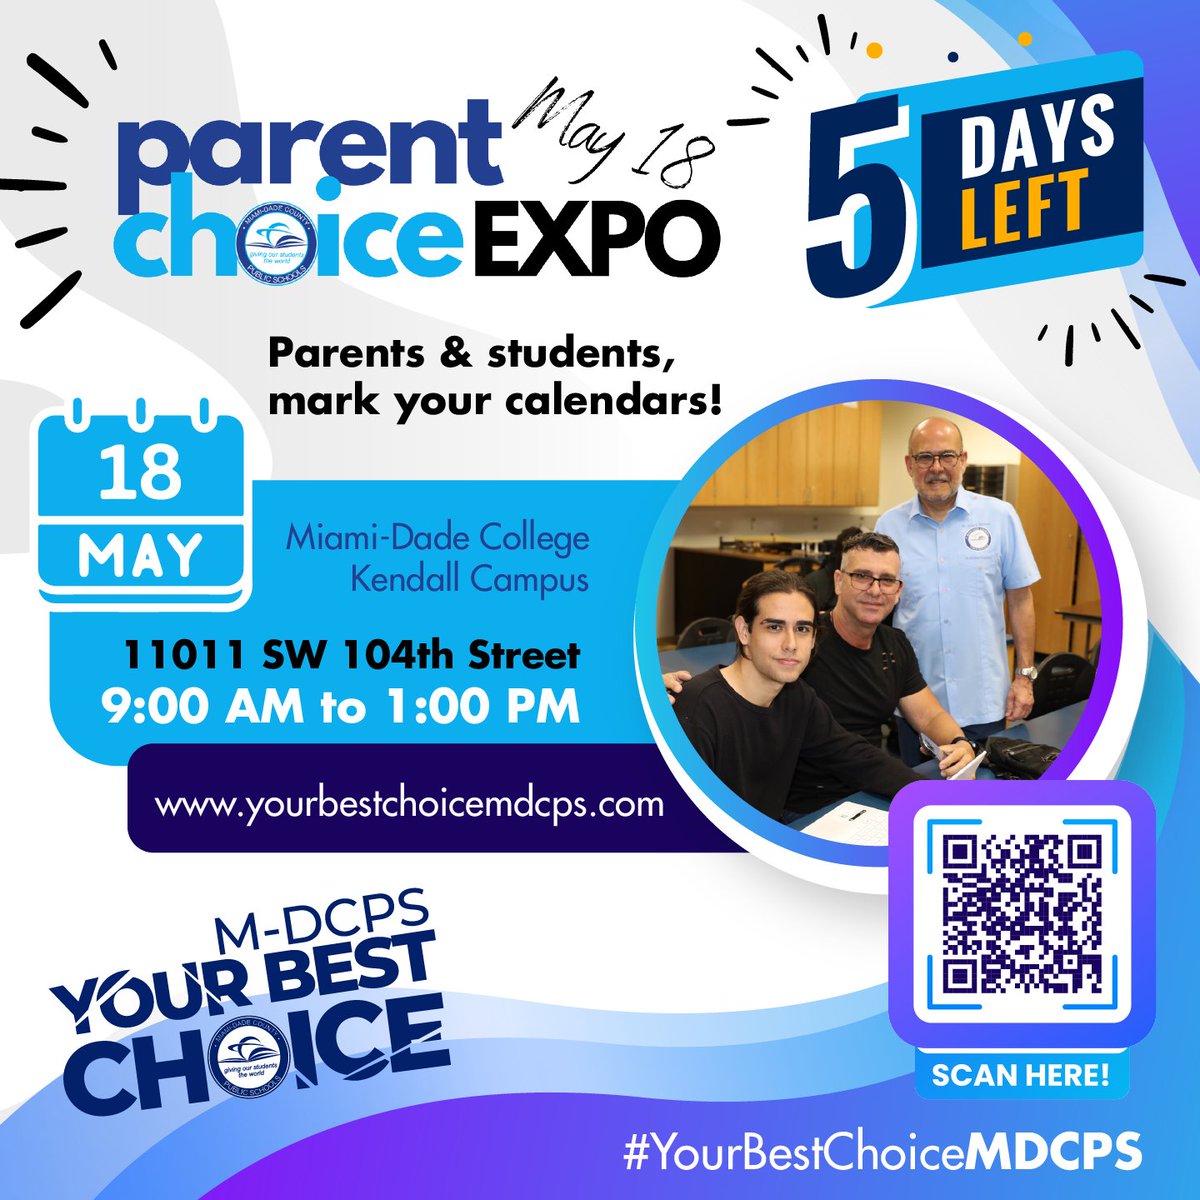 Parents & students, mark your calendars! Join us this Saturday, May 18, at the Parent Choice Expo at @MDCollege Kendall Campus. Discover why @MDCPS is your top education destination. See you there! Learn more at: yourbestchoicemdcps.com #YourBestChoiceMDCPS